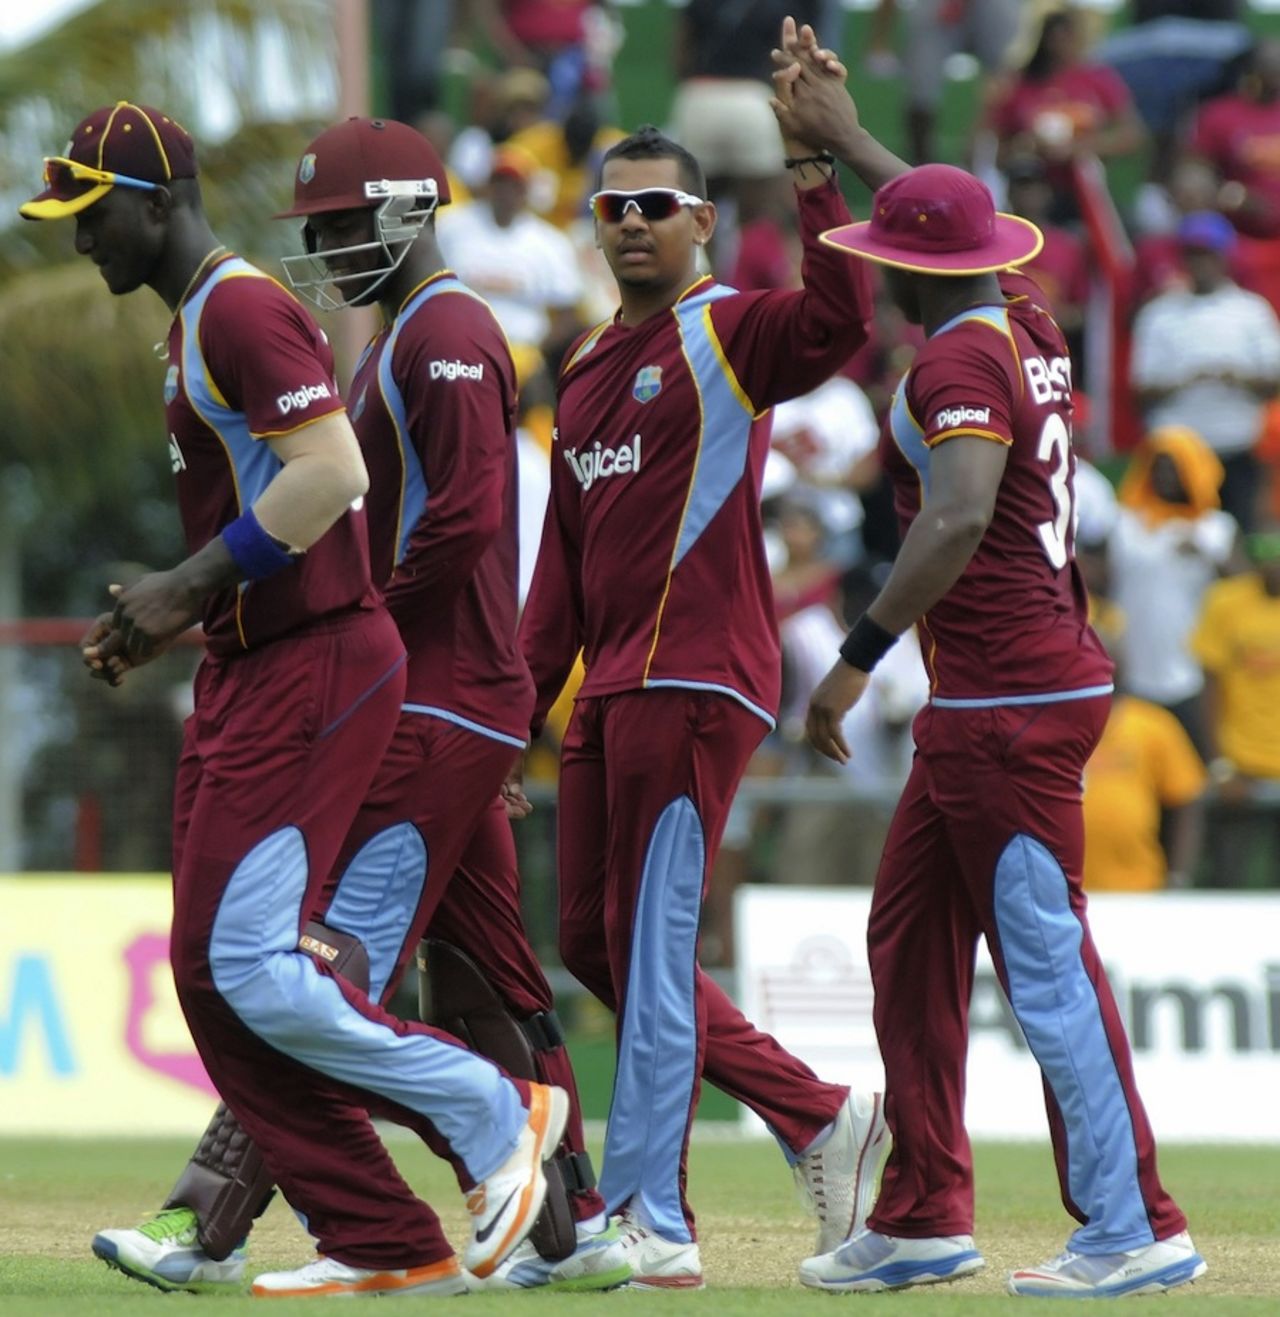 Sunil Narine picked three wickets in the innings, West Indies v Pakistan, 2nd T20I, St Vincent, July 28, 2013